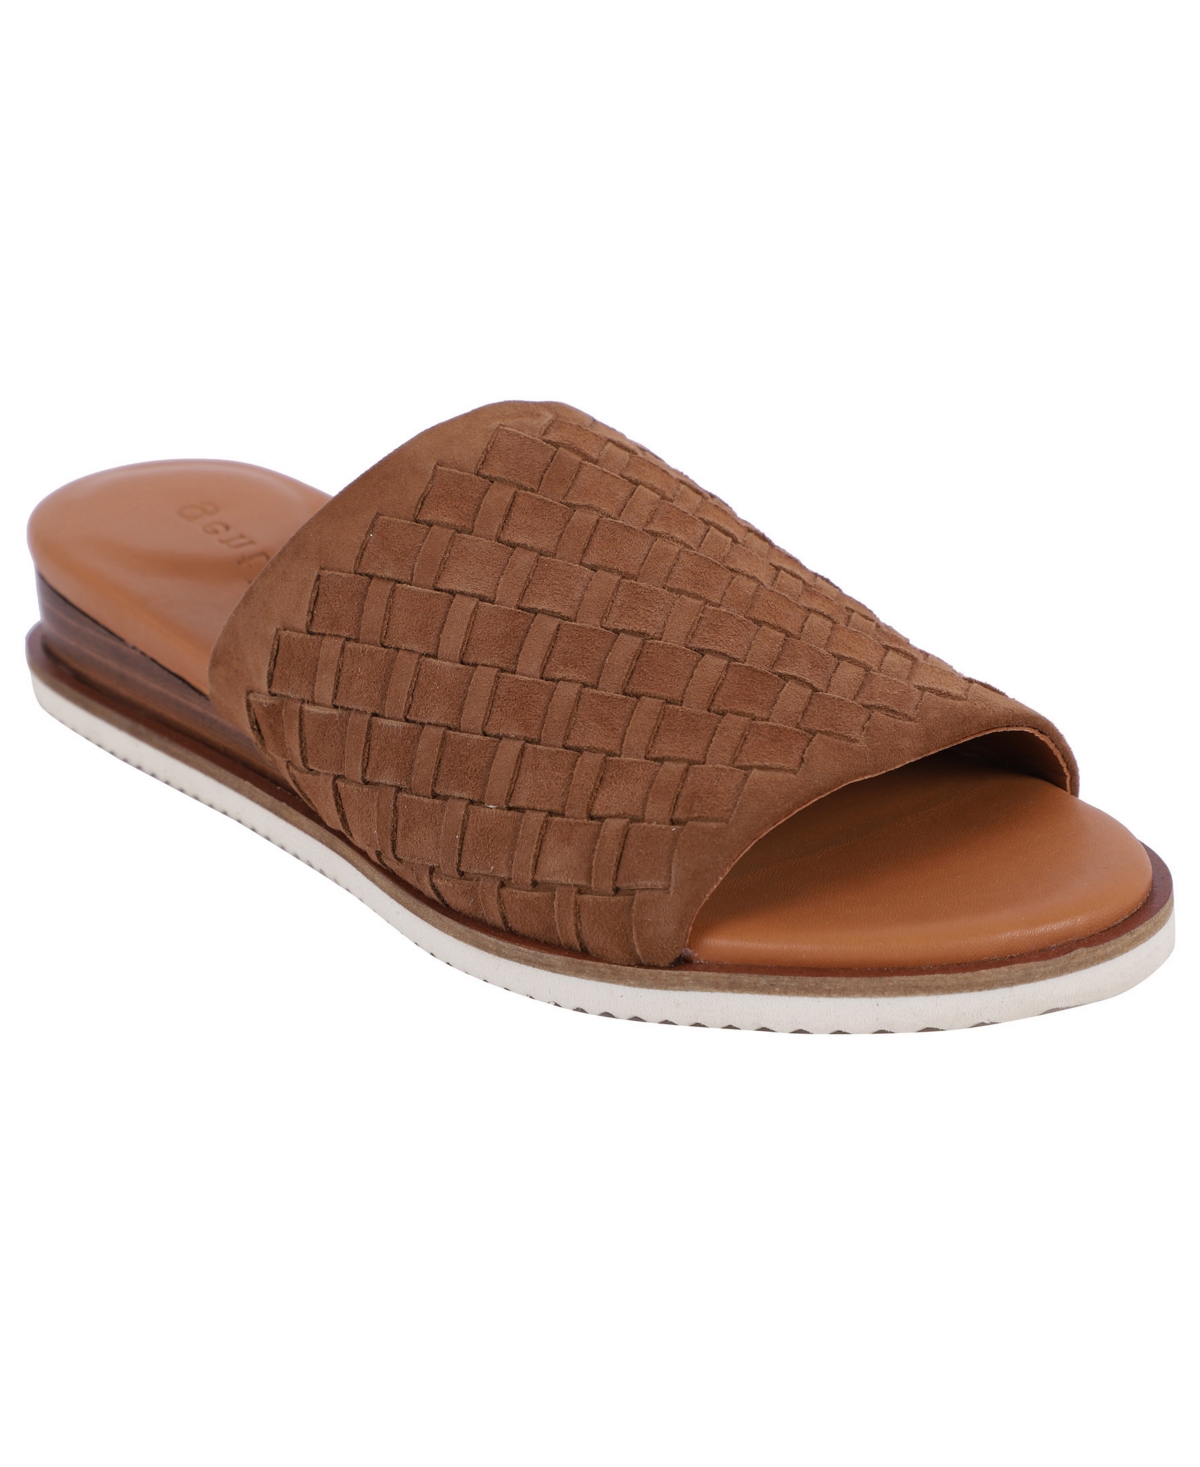 Gentle Souls Women's Angie Wedge Slip-on Sandals In New Taupe Suede